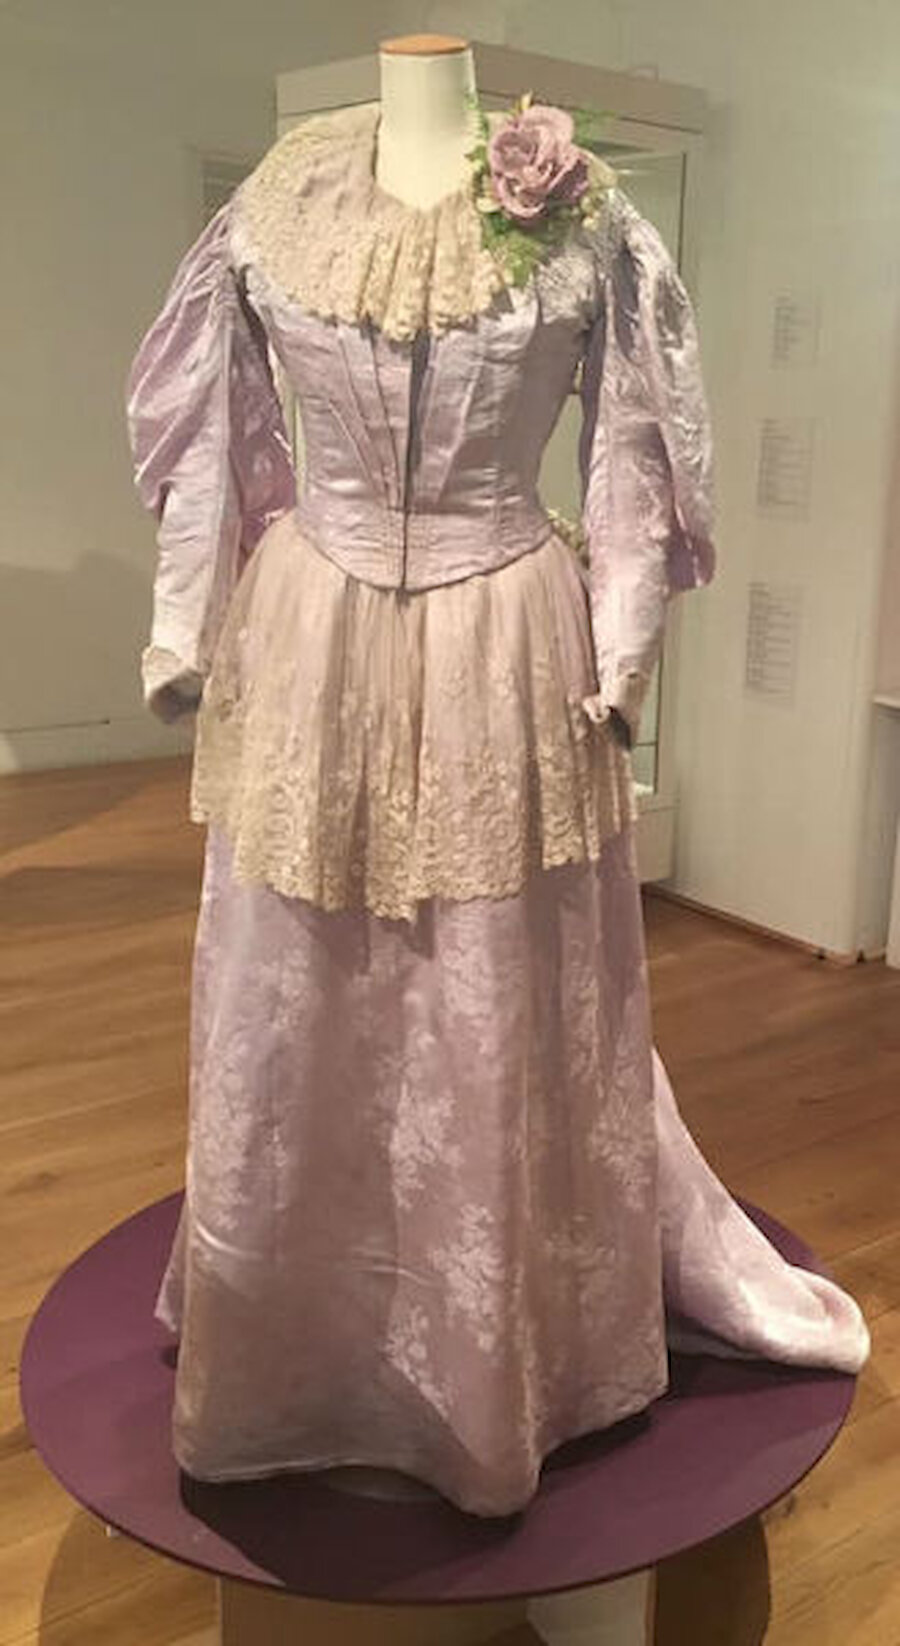 Sinclair Budge's dress in lavender silk (Courtesy Shetland Museum and Archives)